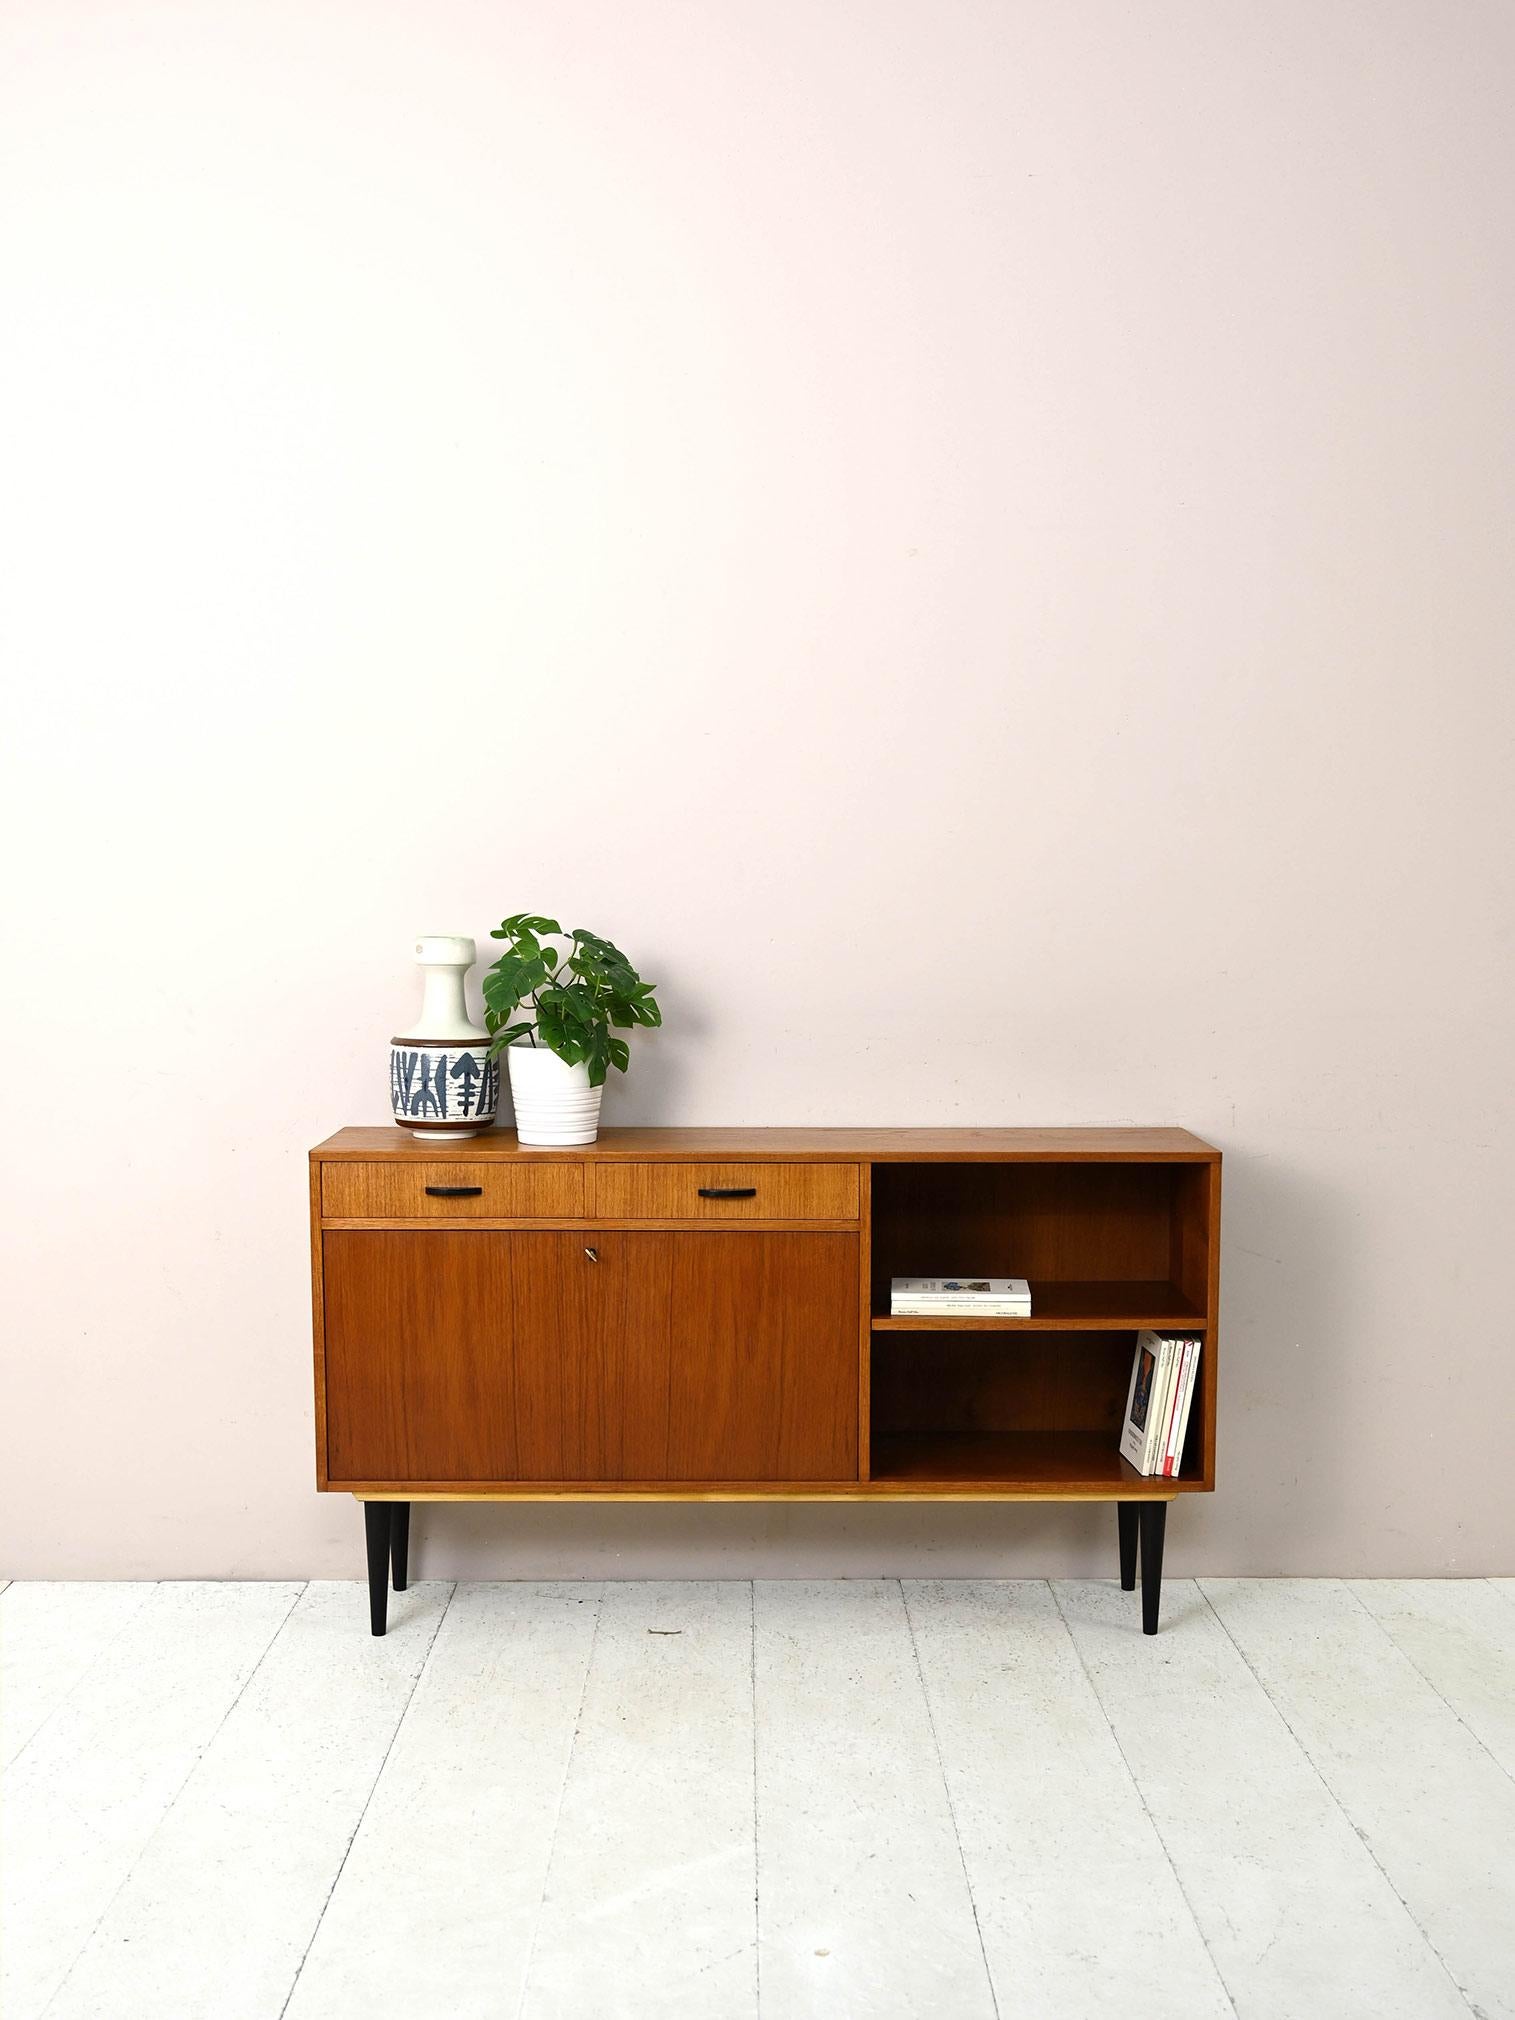 Console sideboard with bar compartment equipped with light.

This original 1960s Scandinavian piece of furniture is distinguished by its distinctive shape and the presence of a drop-down door concealing a shelf equipped with a light.
There are